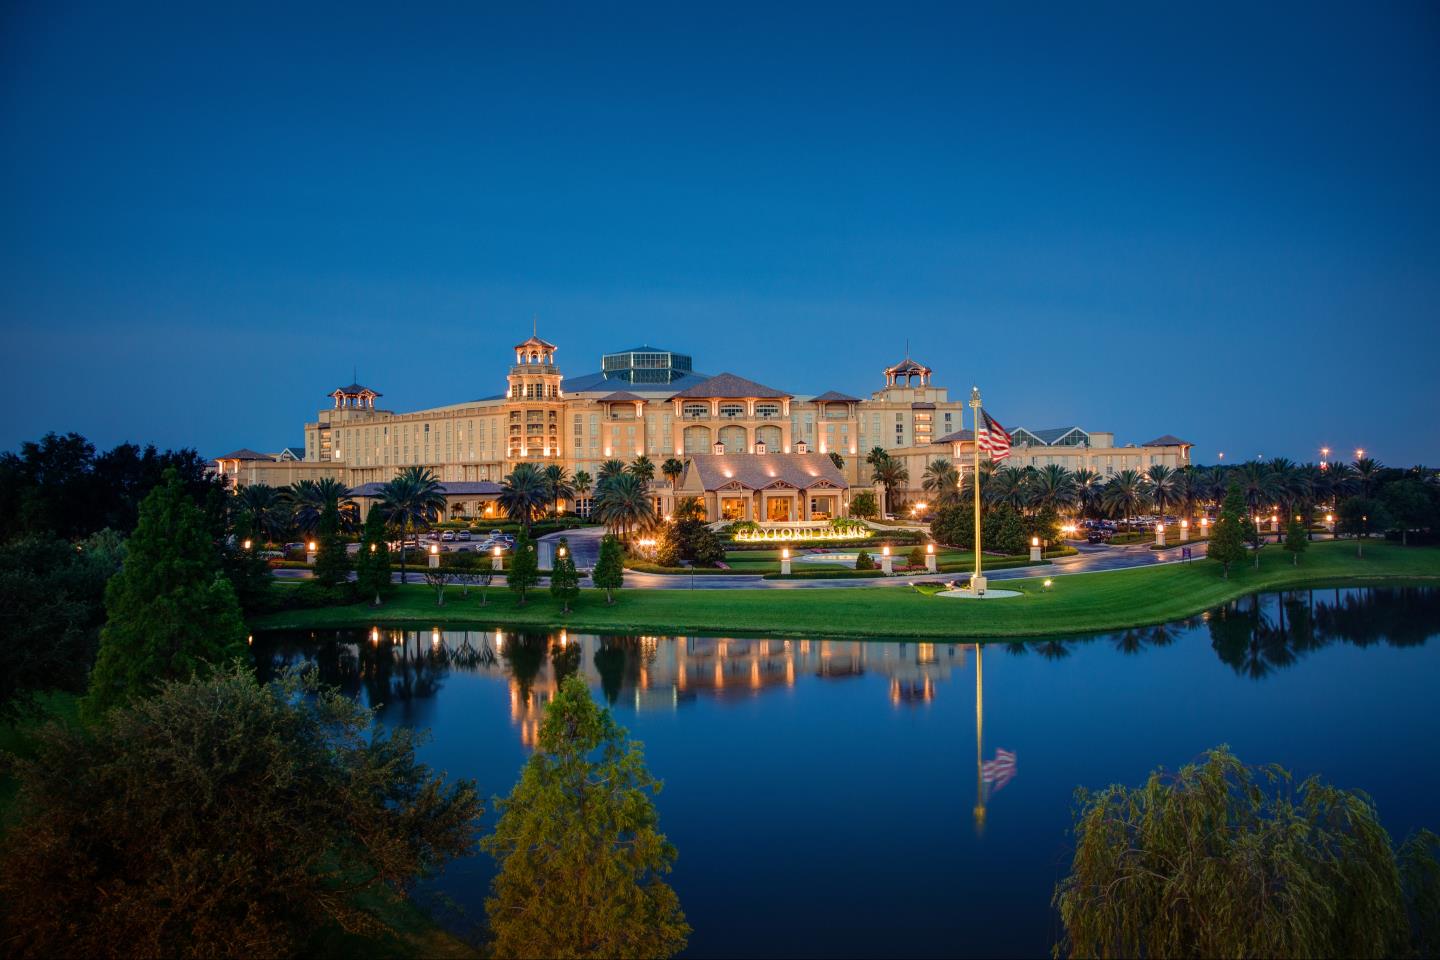 Review of the Gaylord Palms by Walt Disney World